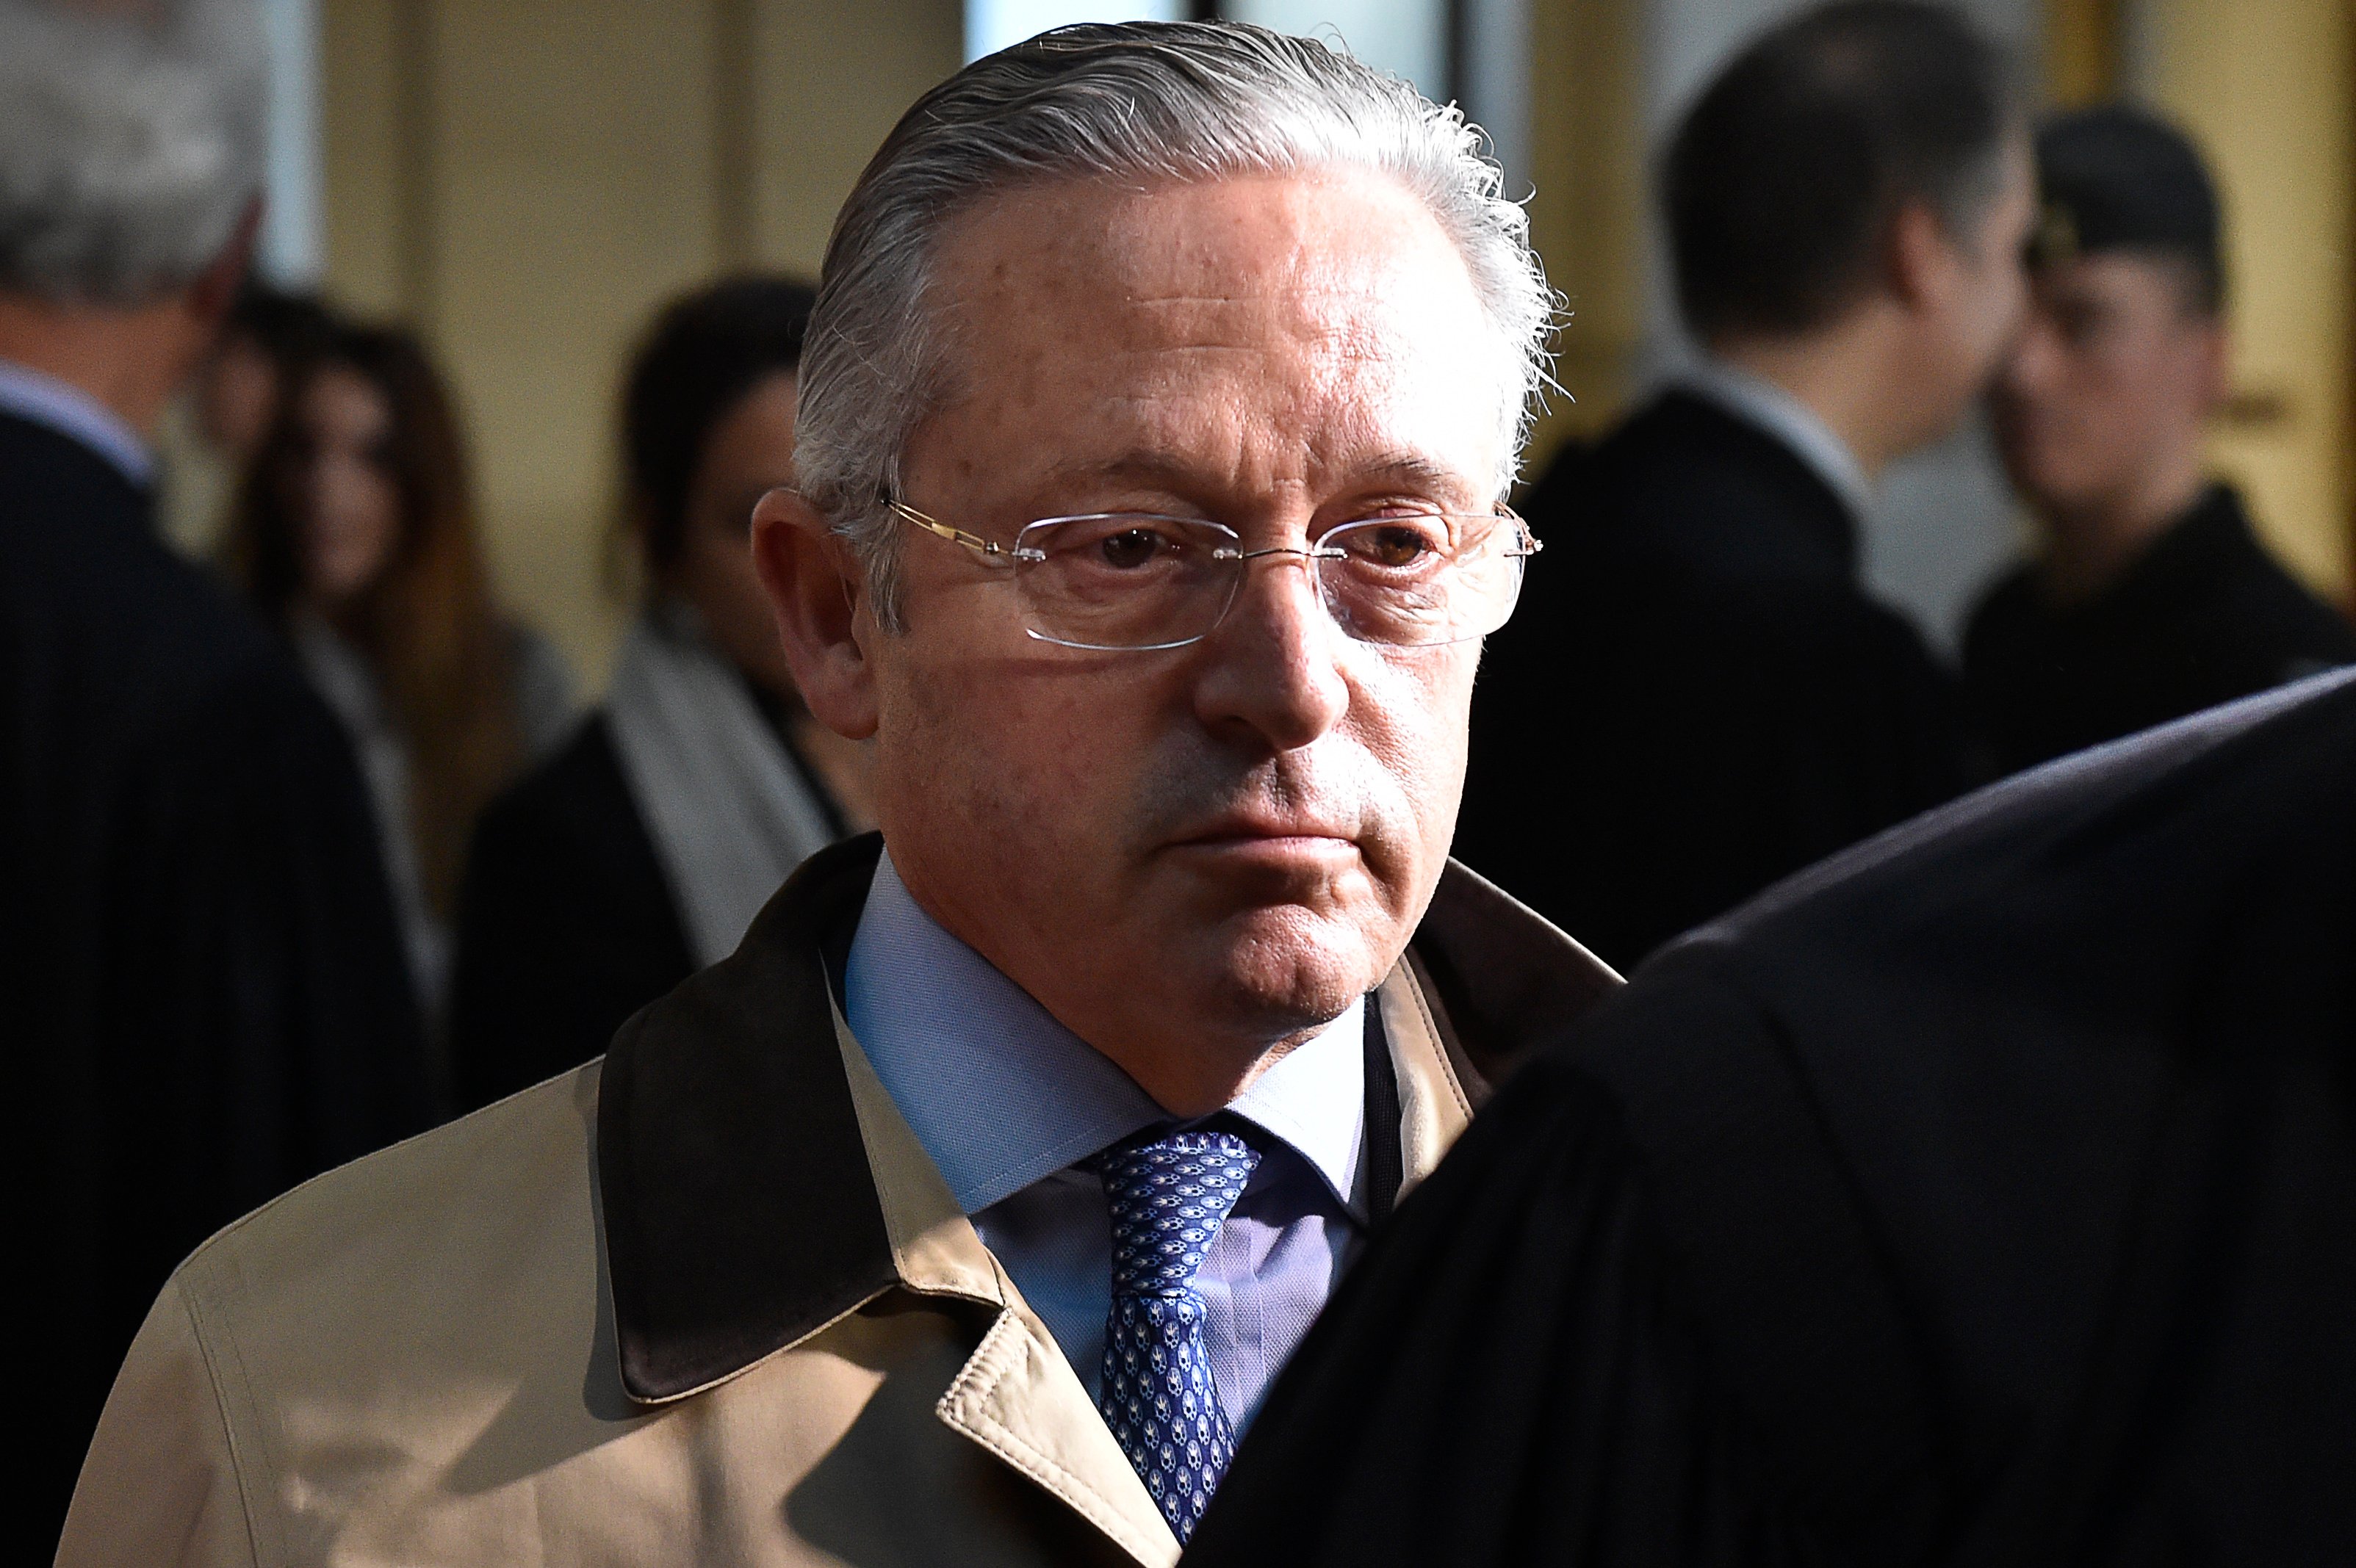 Franco-American art-dealer Guy Wildenstein leaves the Paris courthouse on January 4, 2016, after the first day in the trial of several members of the Wildenstein art-dealing dynasty on charges of tax fraud and money-laundering. Several members of the Wildenstein art-dealing dynasty went on trial in Paris on January 4 charged with stashing hundreds of millions of euros in inheritance money out of reach of the French taxman. Family patriarch Guy Wildenstein, 70, faces up to 10 years in prison for tax fraud and money laundering in a multi-generational inheritance squabble worthy of a soap opera. Courtesy of Alain Jocard/AFP/Getty Images.